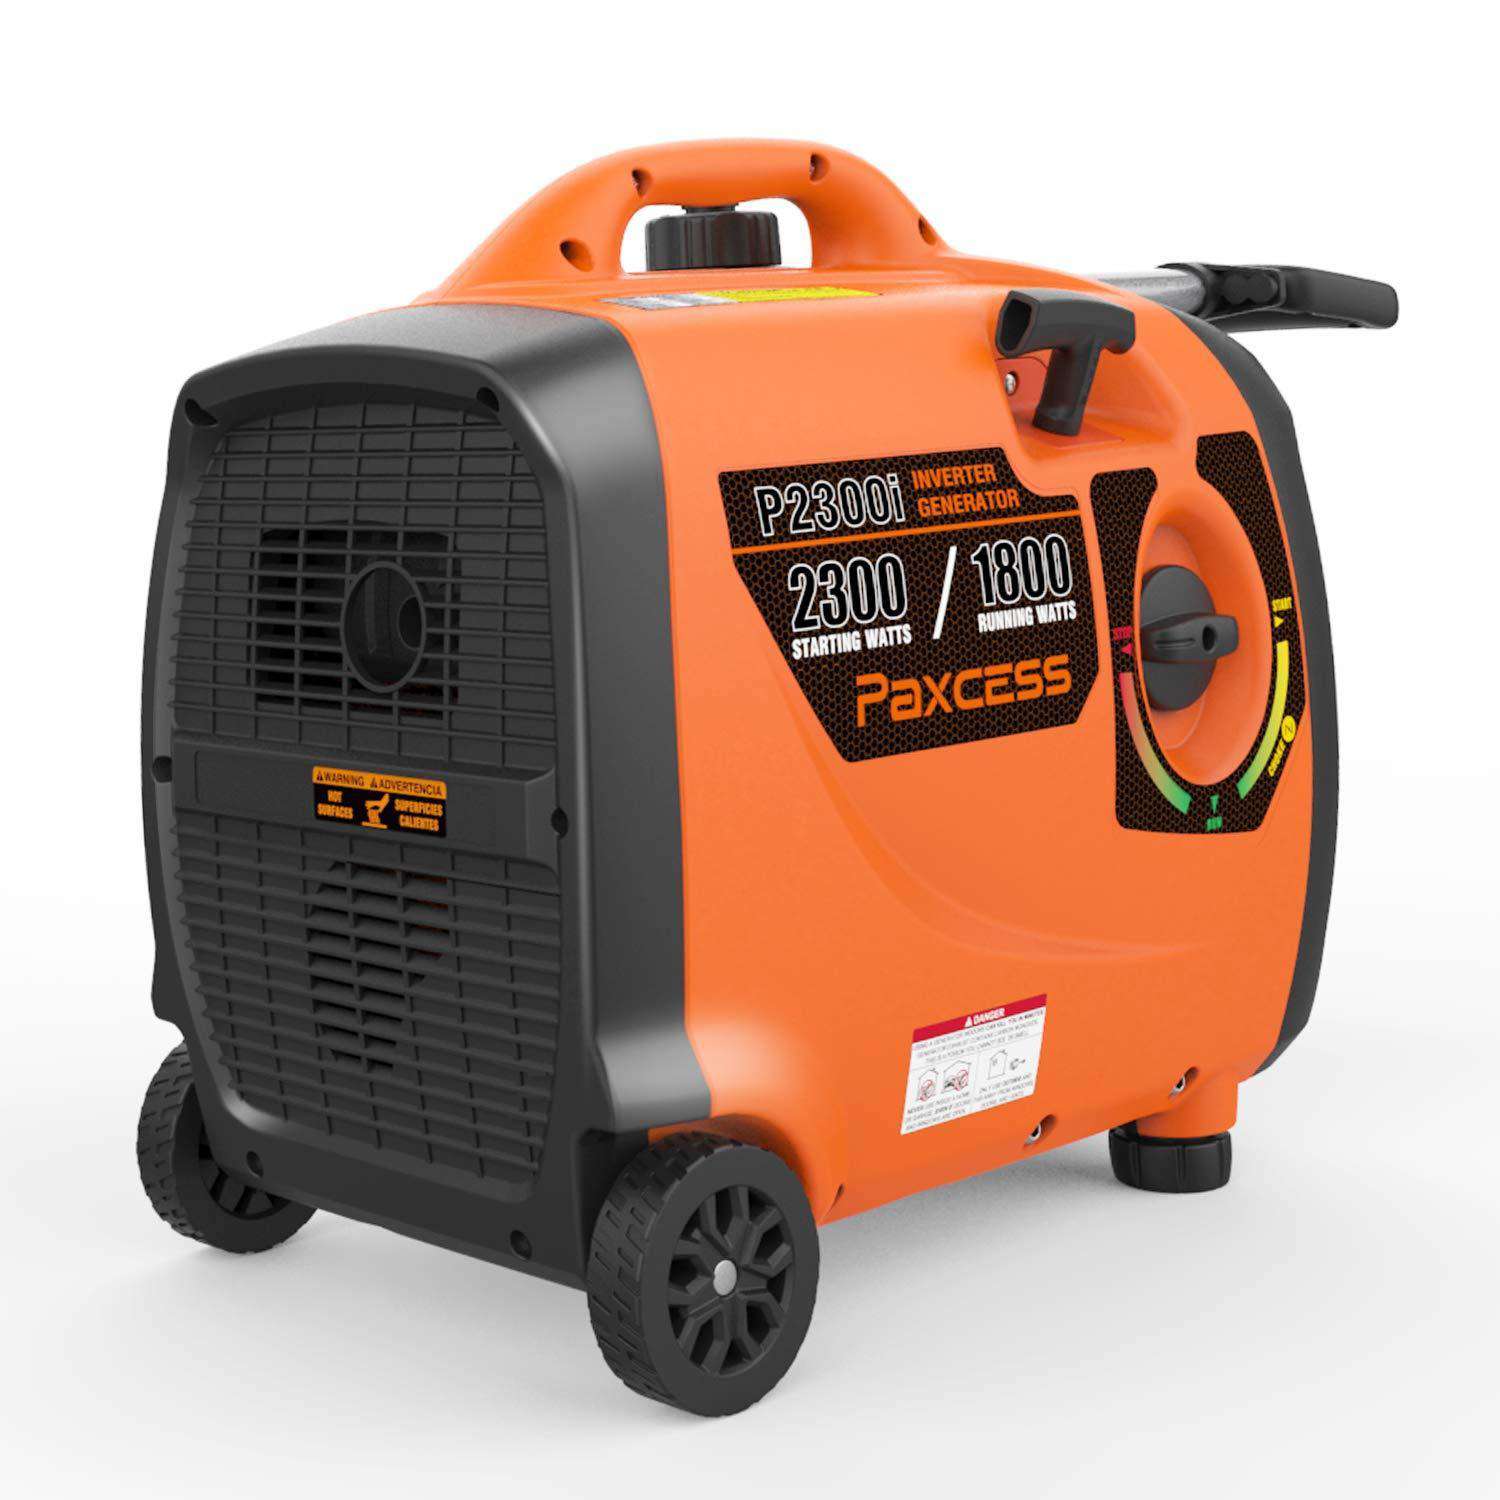 Paxcess, Paxcess P2300i 1800W/2300W Super Quiet Portable Gas Inverter Generator with Wheels and Handle New